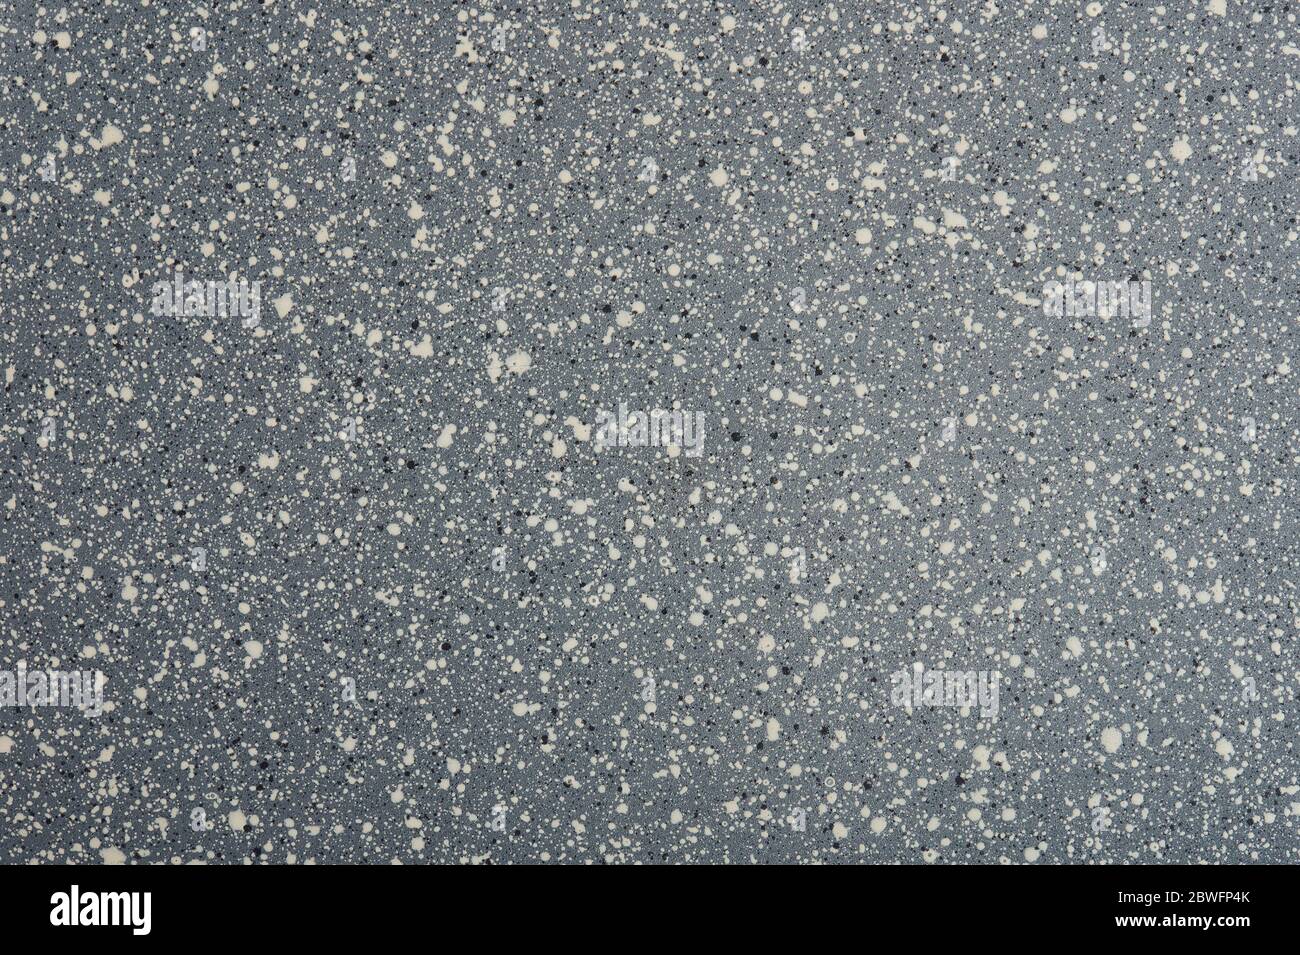 Abstarct grey ceramic texture with white dots close up view Stock Photo -  Alamy